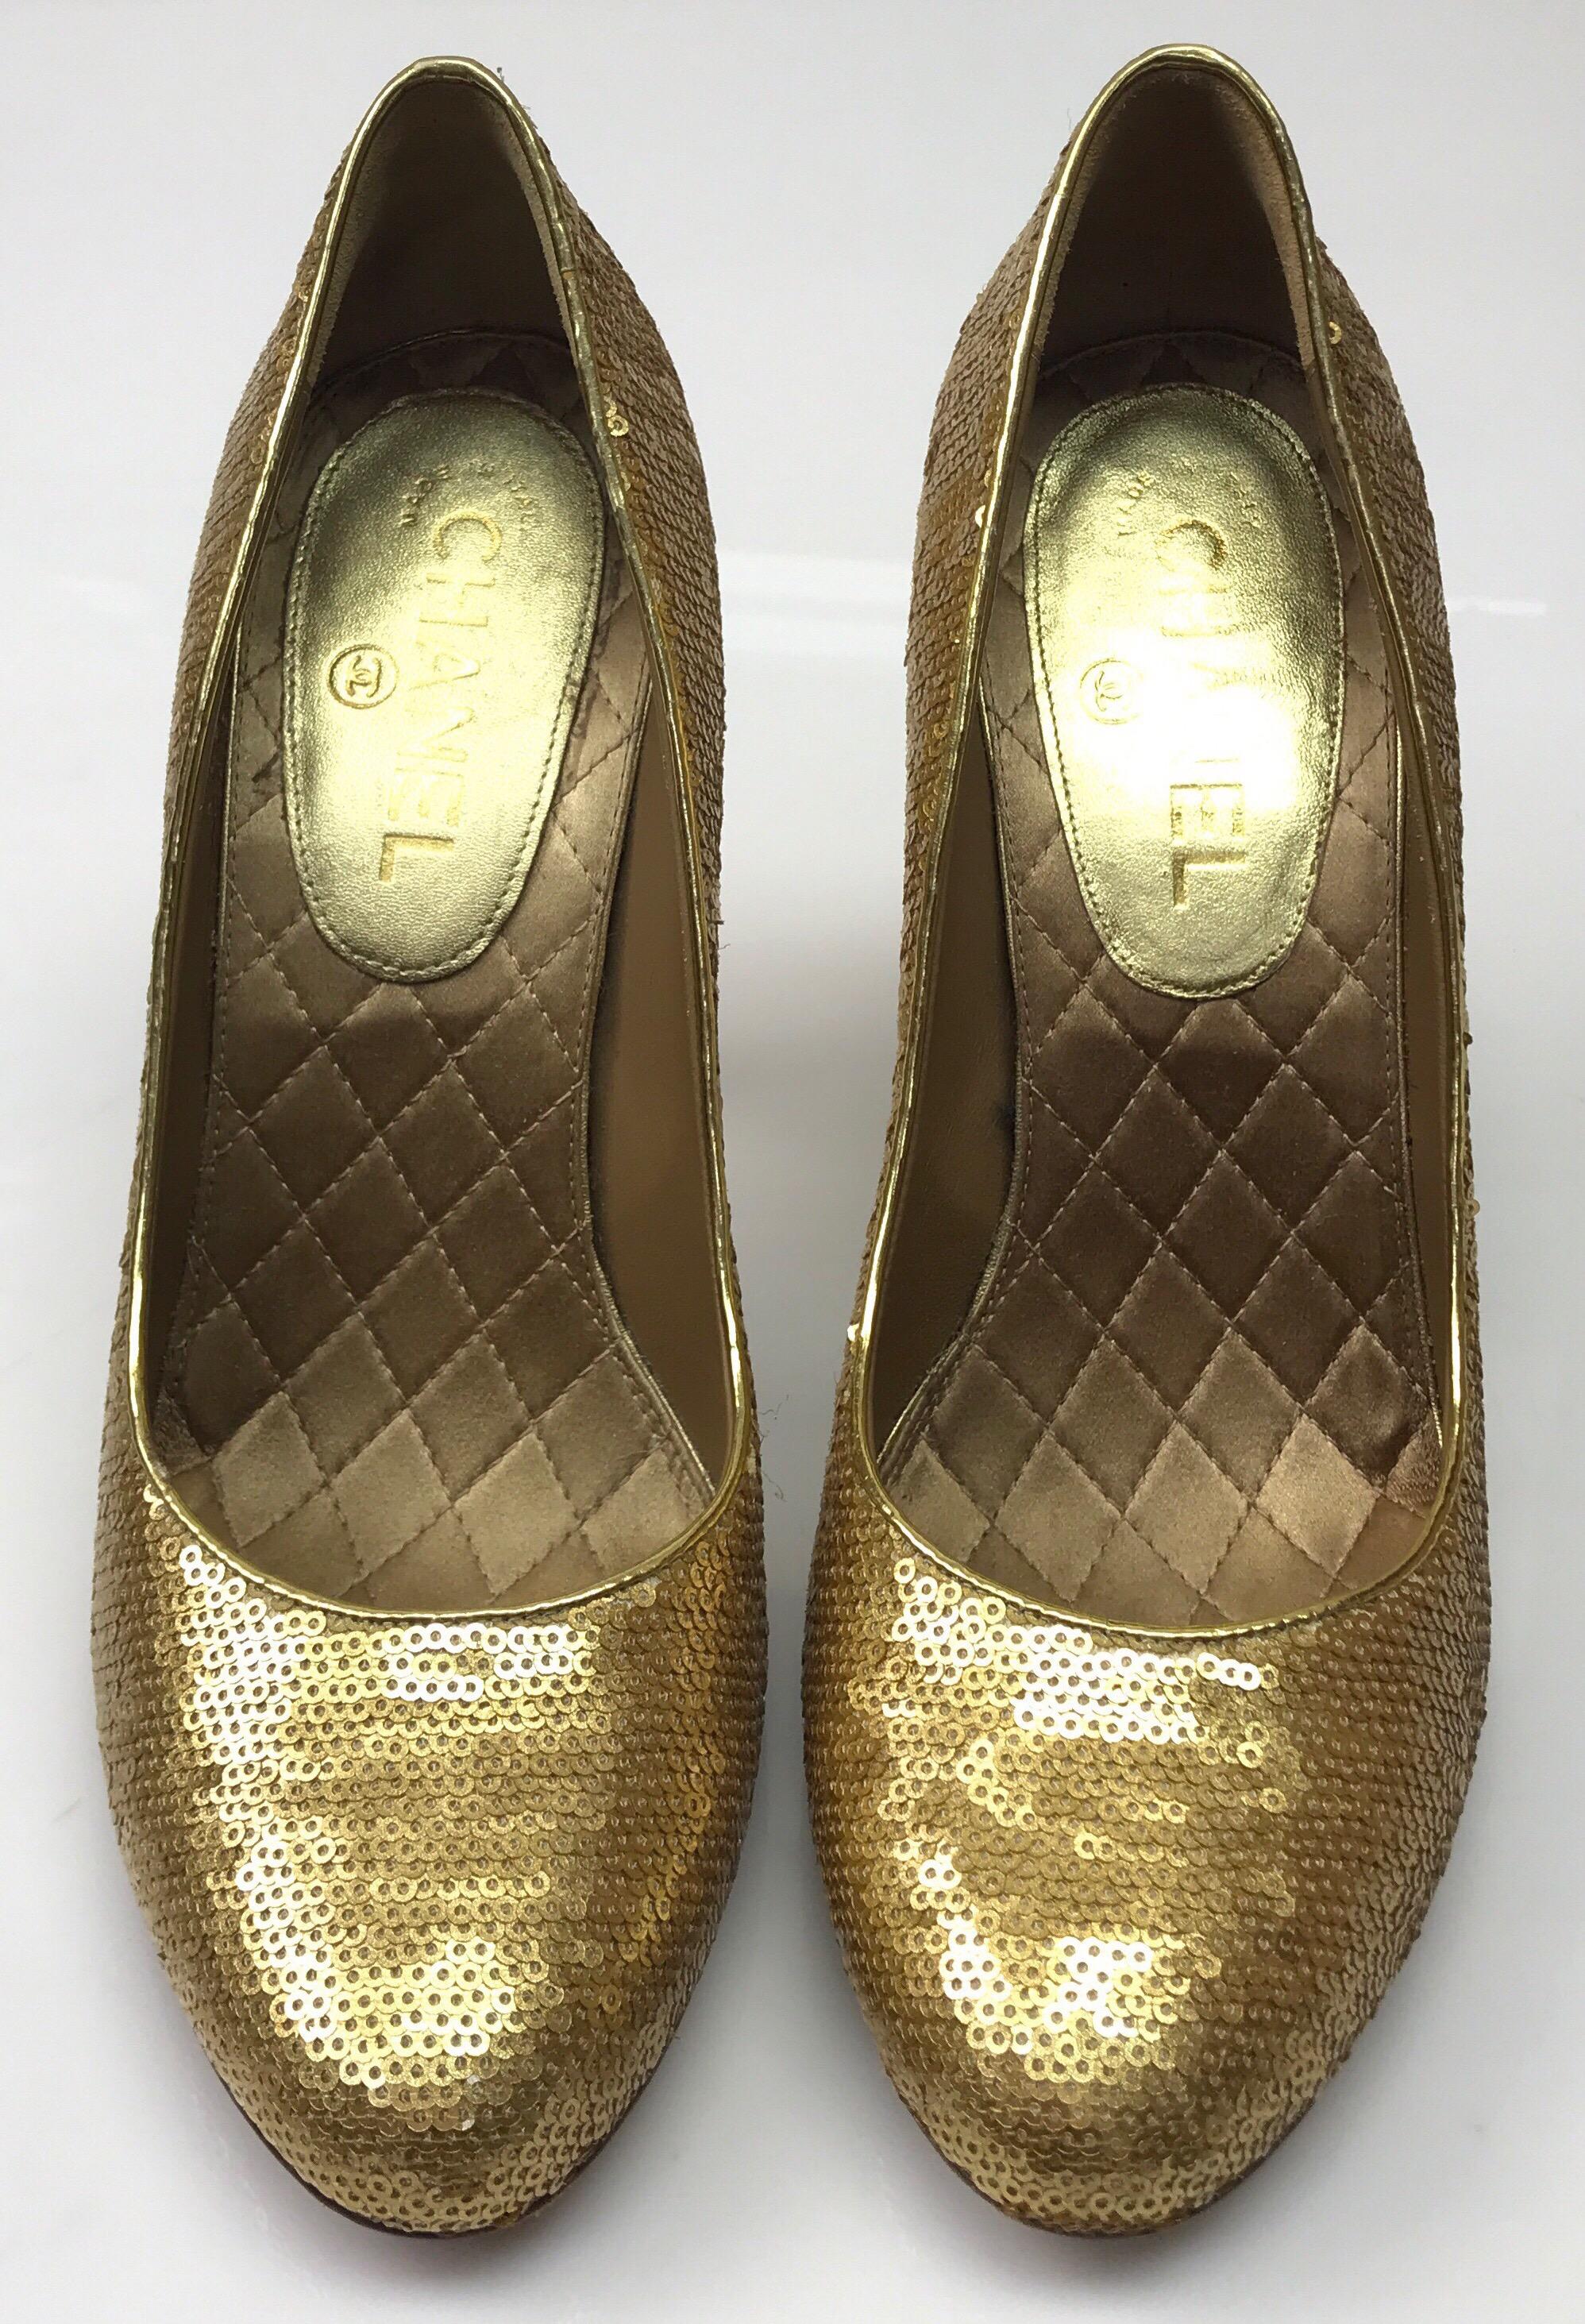 CHANEL Gold Silk Podesua Sequined Pumps - 40. These darling Chanel pumps are in good condition. They are missing a few sequins in two places, as shown in picture. The shoes are made entirely of gold sequins and have a gold silk heel with a gold 